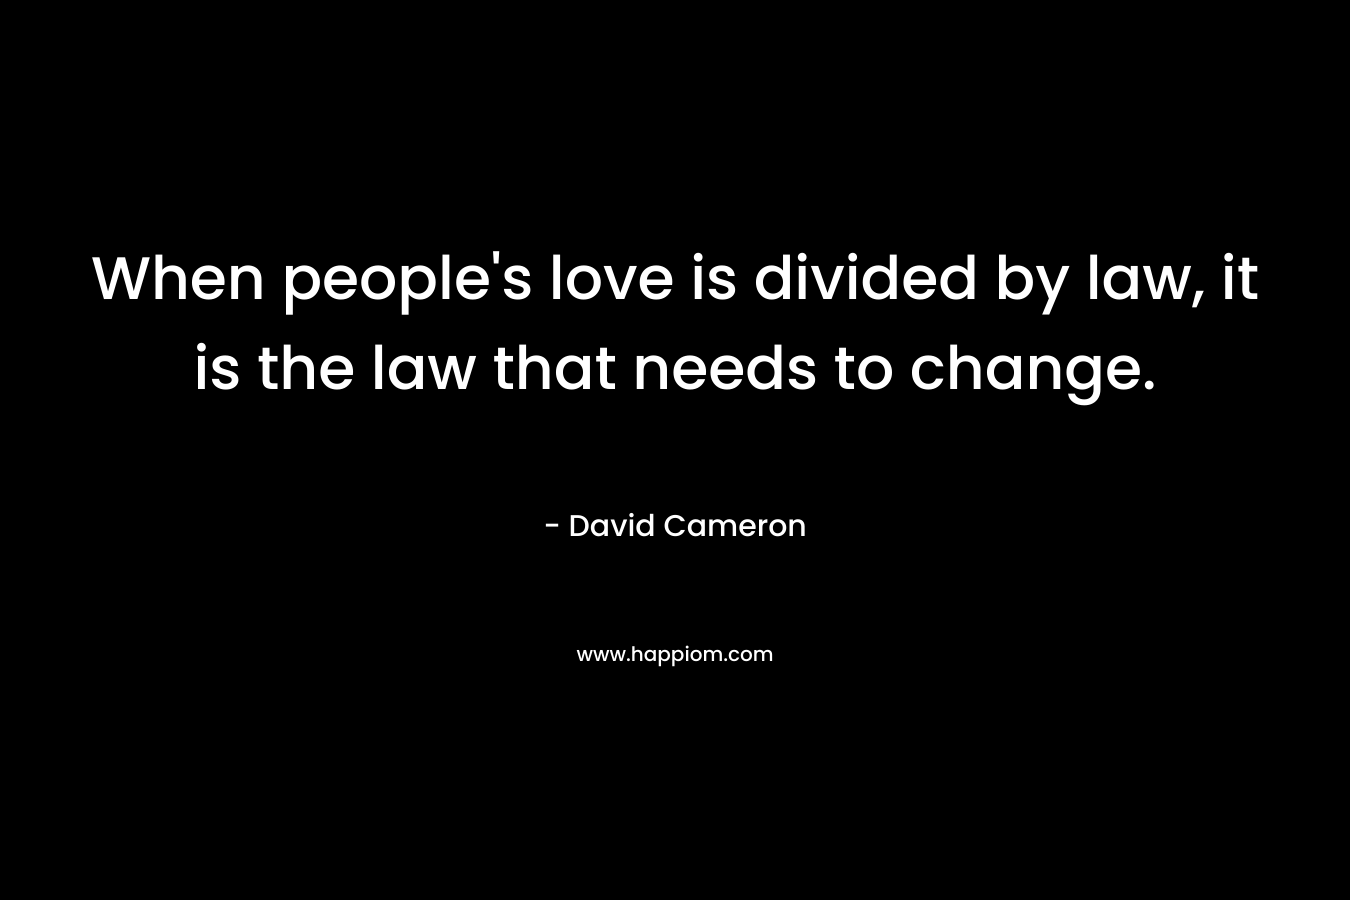 When people’s love is divided by law, it is the law that needs to change. – David Cameron